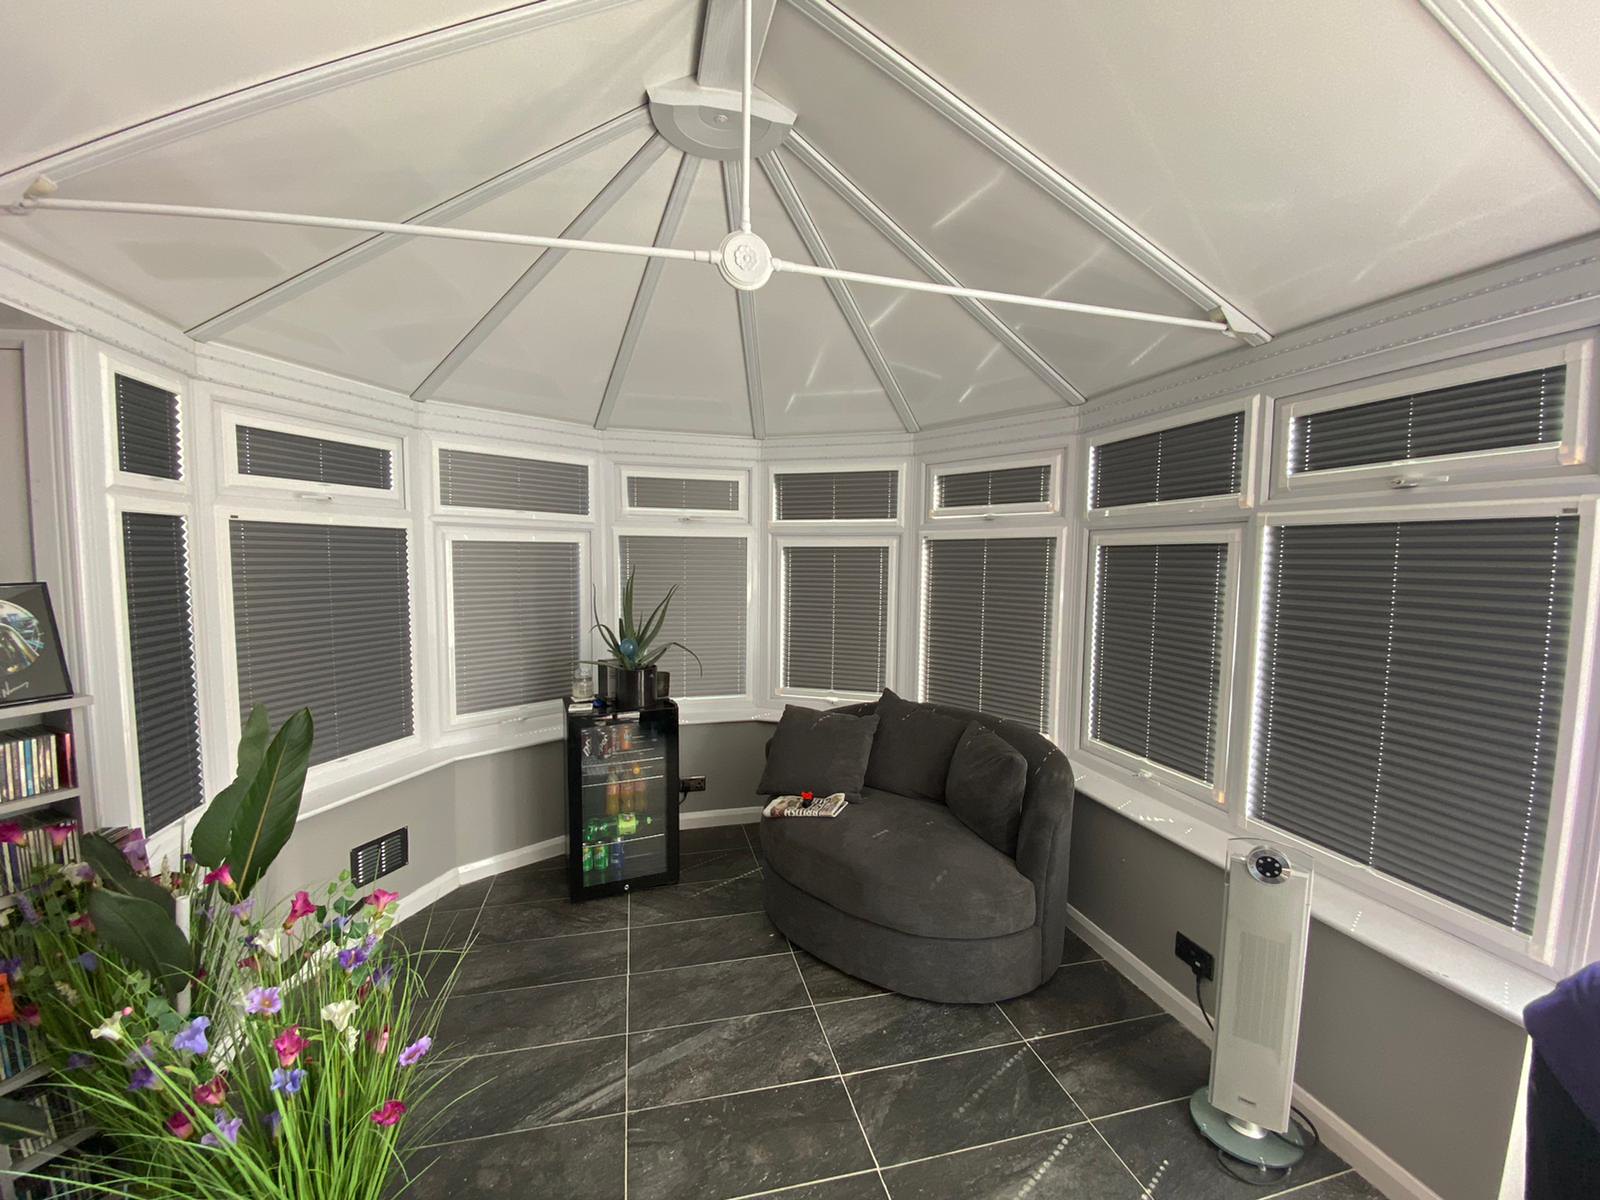 pleated blinds in conservatory